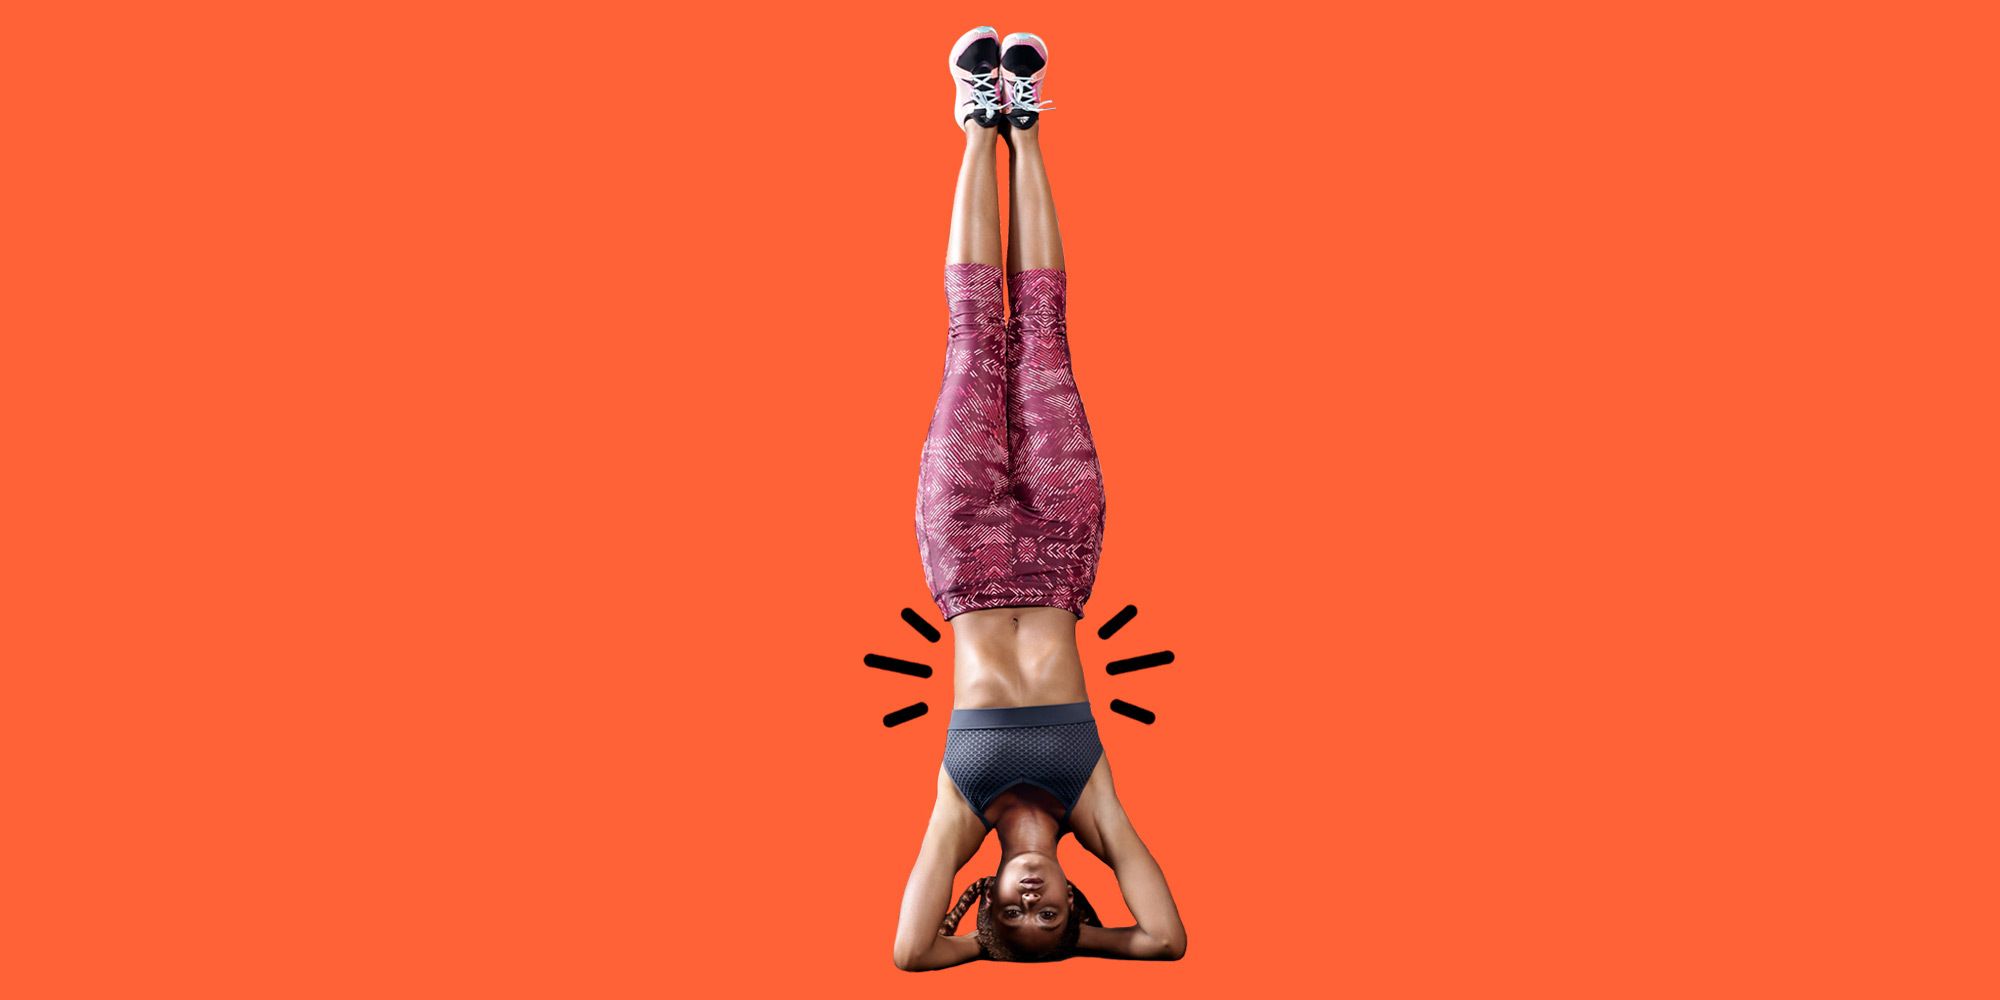 How to Do a Headstand: Master this Yoga Move